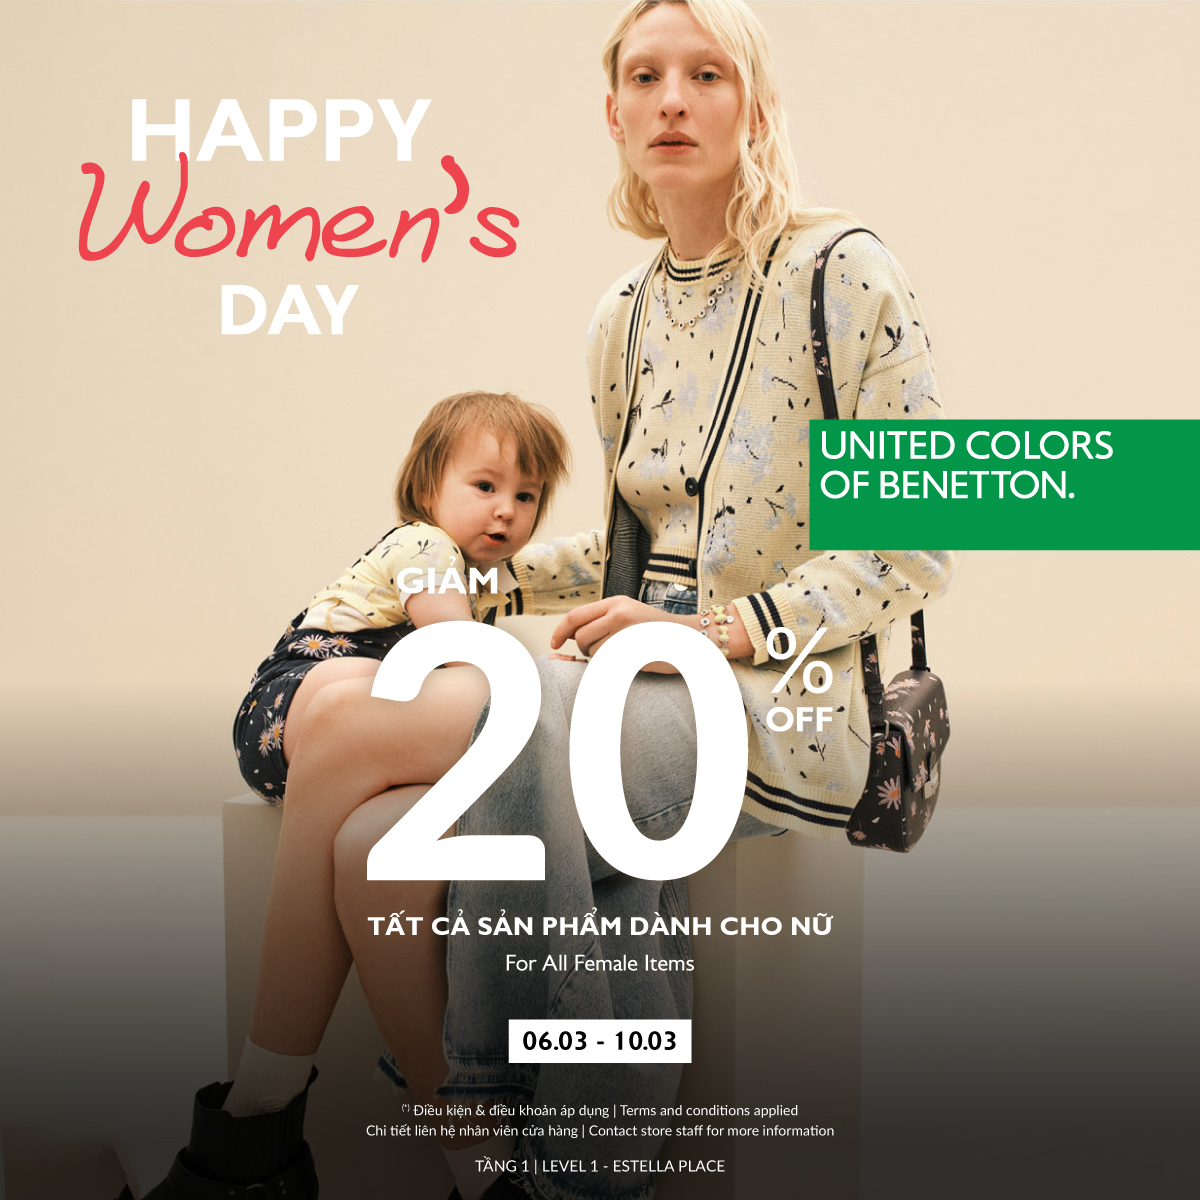 𝗨𝗡𝗜𝗧𝗘𝗗 𝗖𝗢𝗟𝗢𝗥𝗦 𝗢𝗙 𝗕𝗘𝗡𝗘𝗧𝗧𝗢𝗡 | CELEBRATEING INTERNATIONAL WOMEN'S DAY, BENETTON PROMOTE 20% OFF AND SPECIAL GIFTS